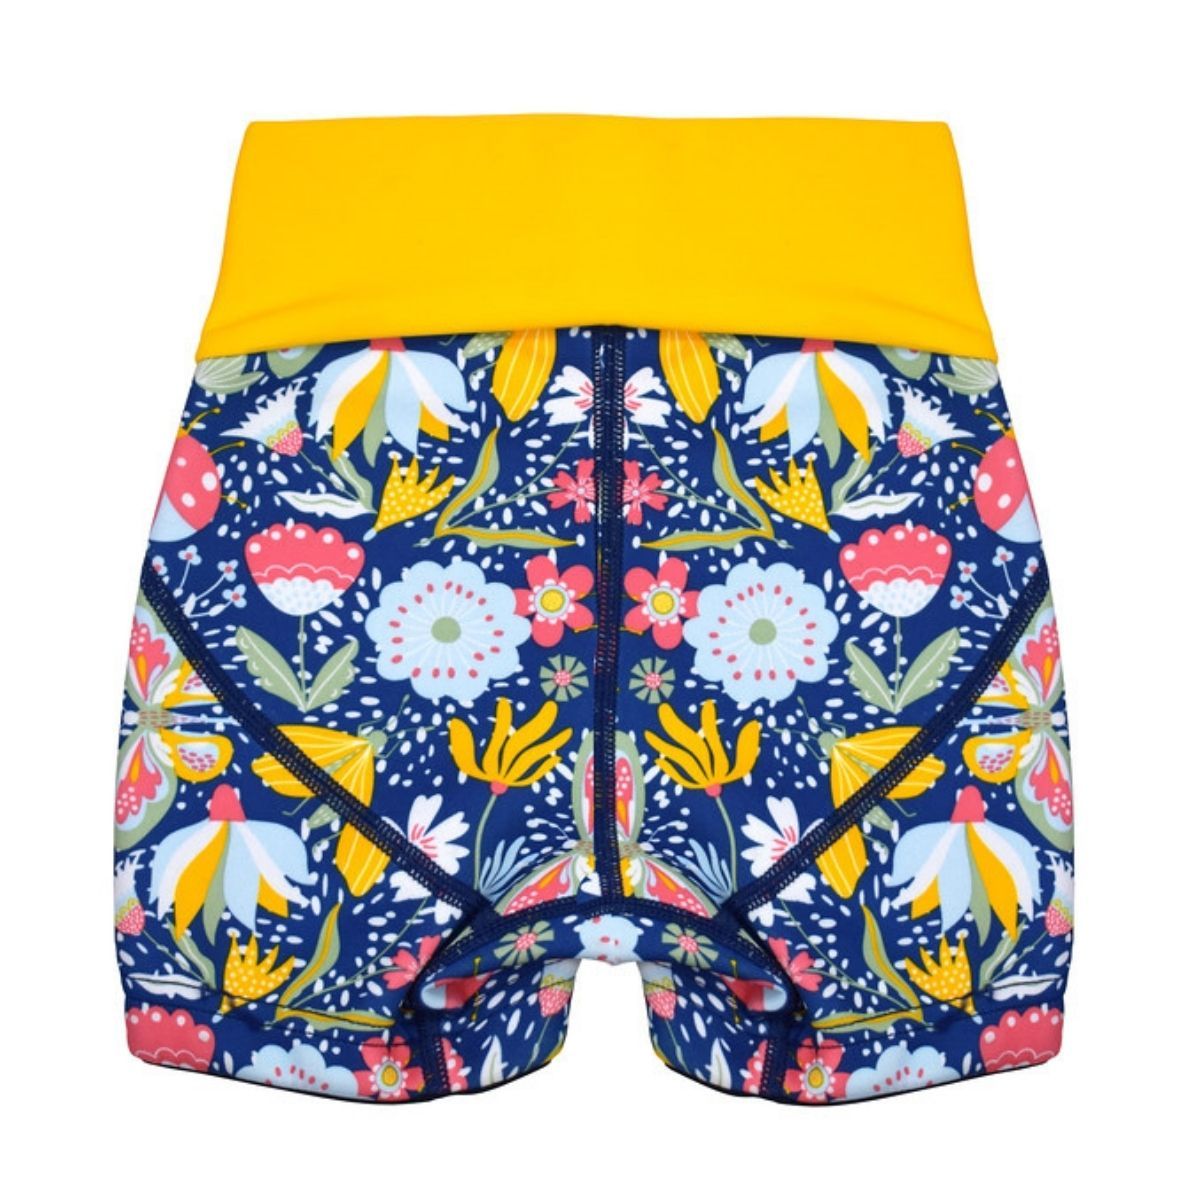 Neoprene swim shorts in navy blue with yellow waist and floral print. Back.